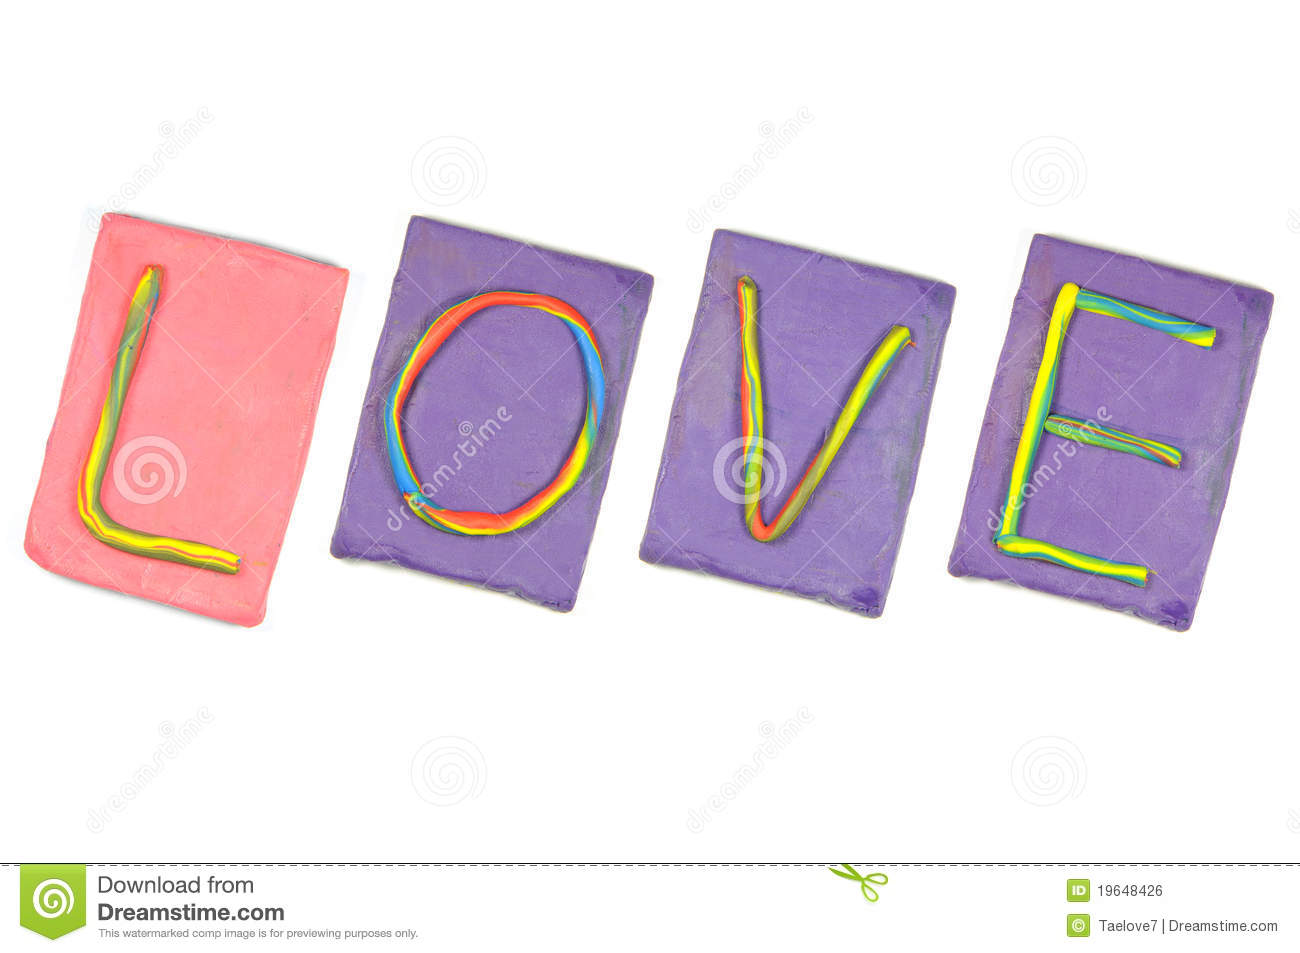 Clay Letters  Words Love Royalty Free Stock Image   Image  19648426